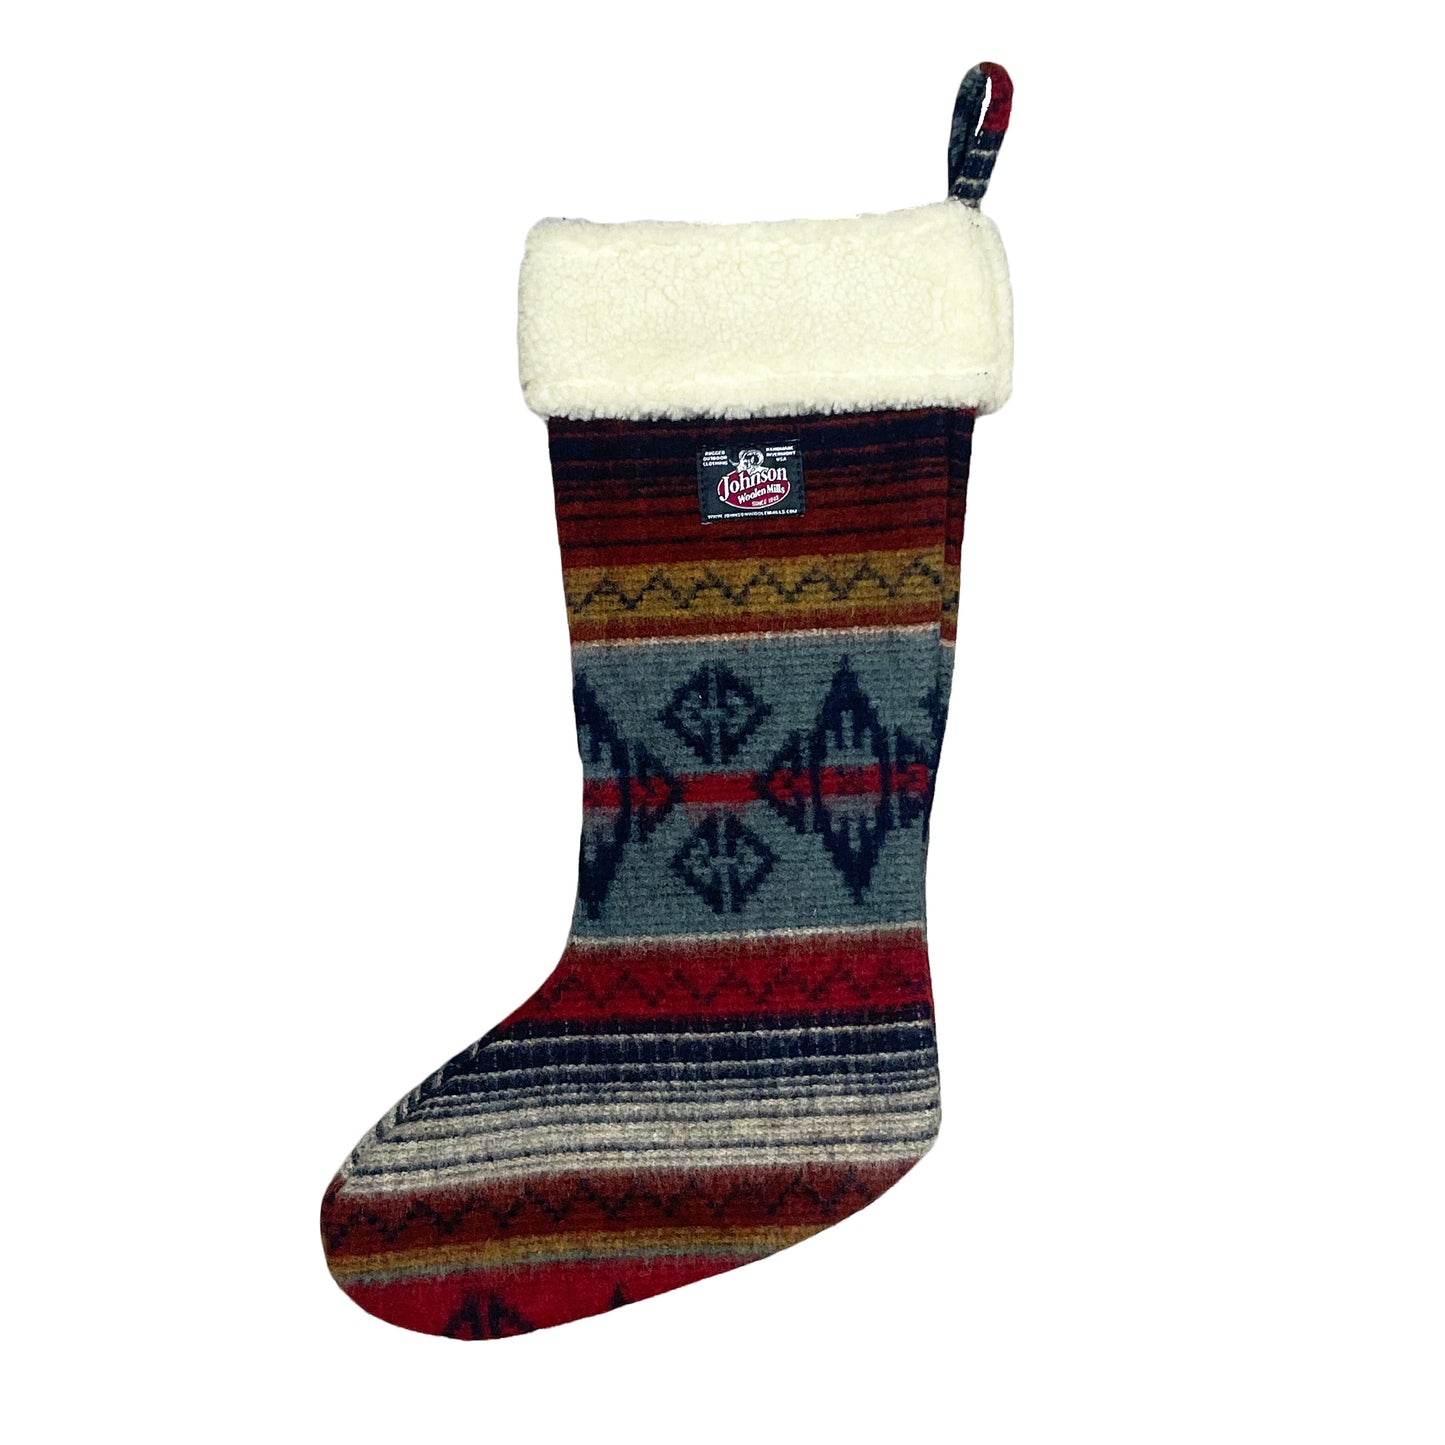 Johnson Woolen Mills Early frost wool Christmas stocking